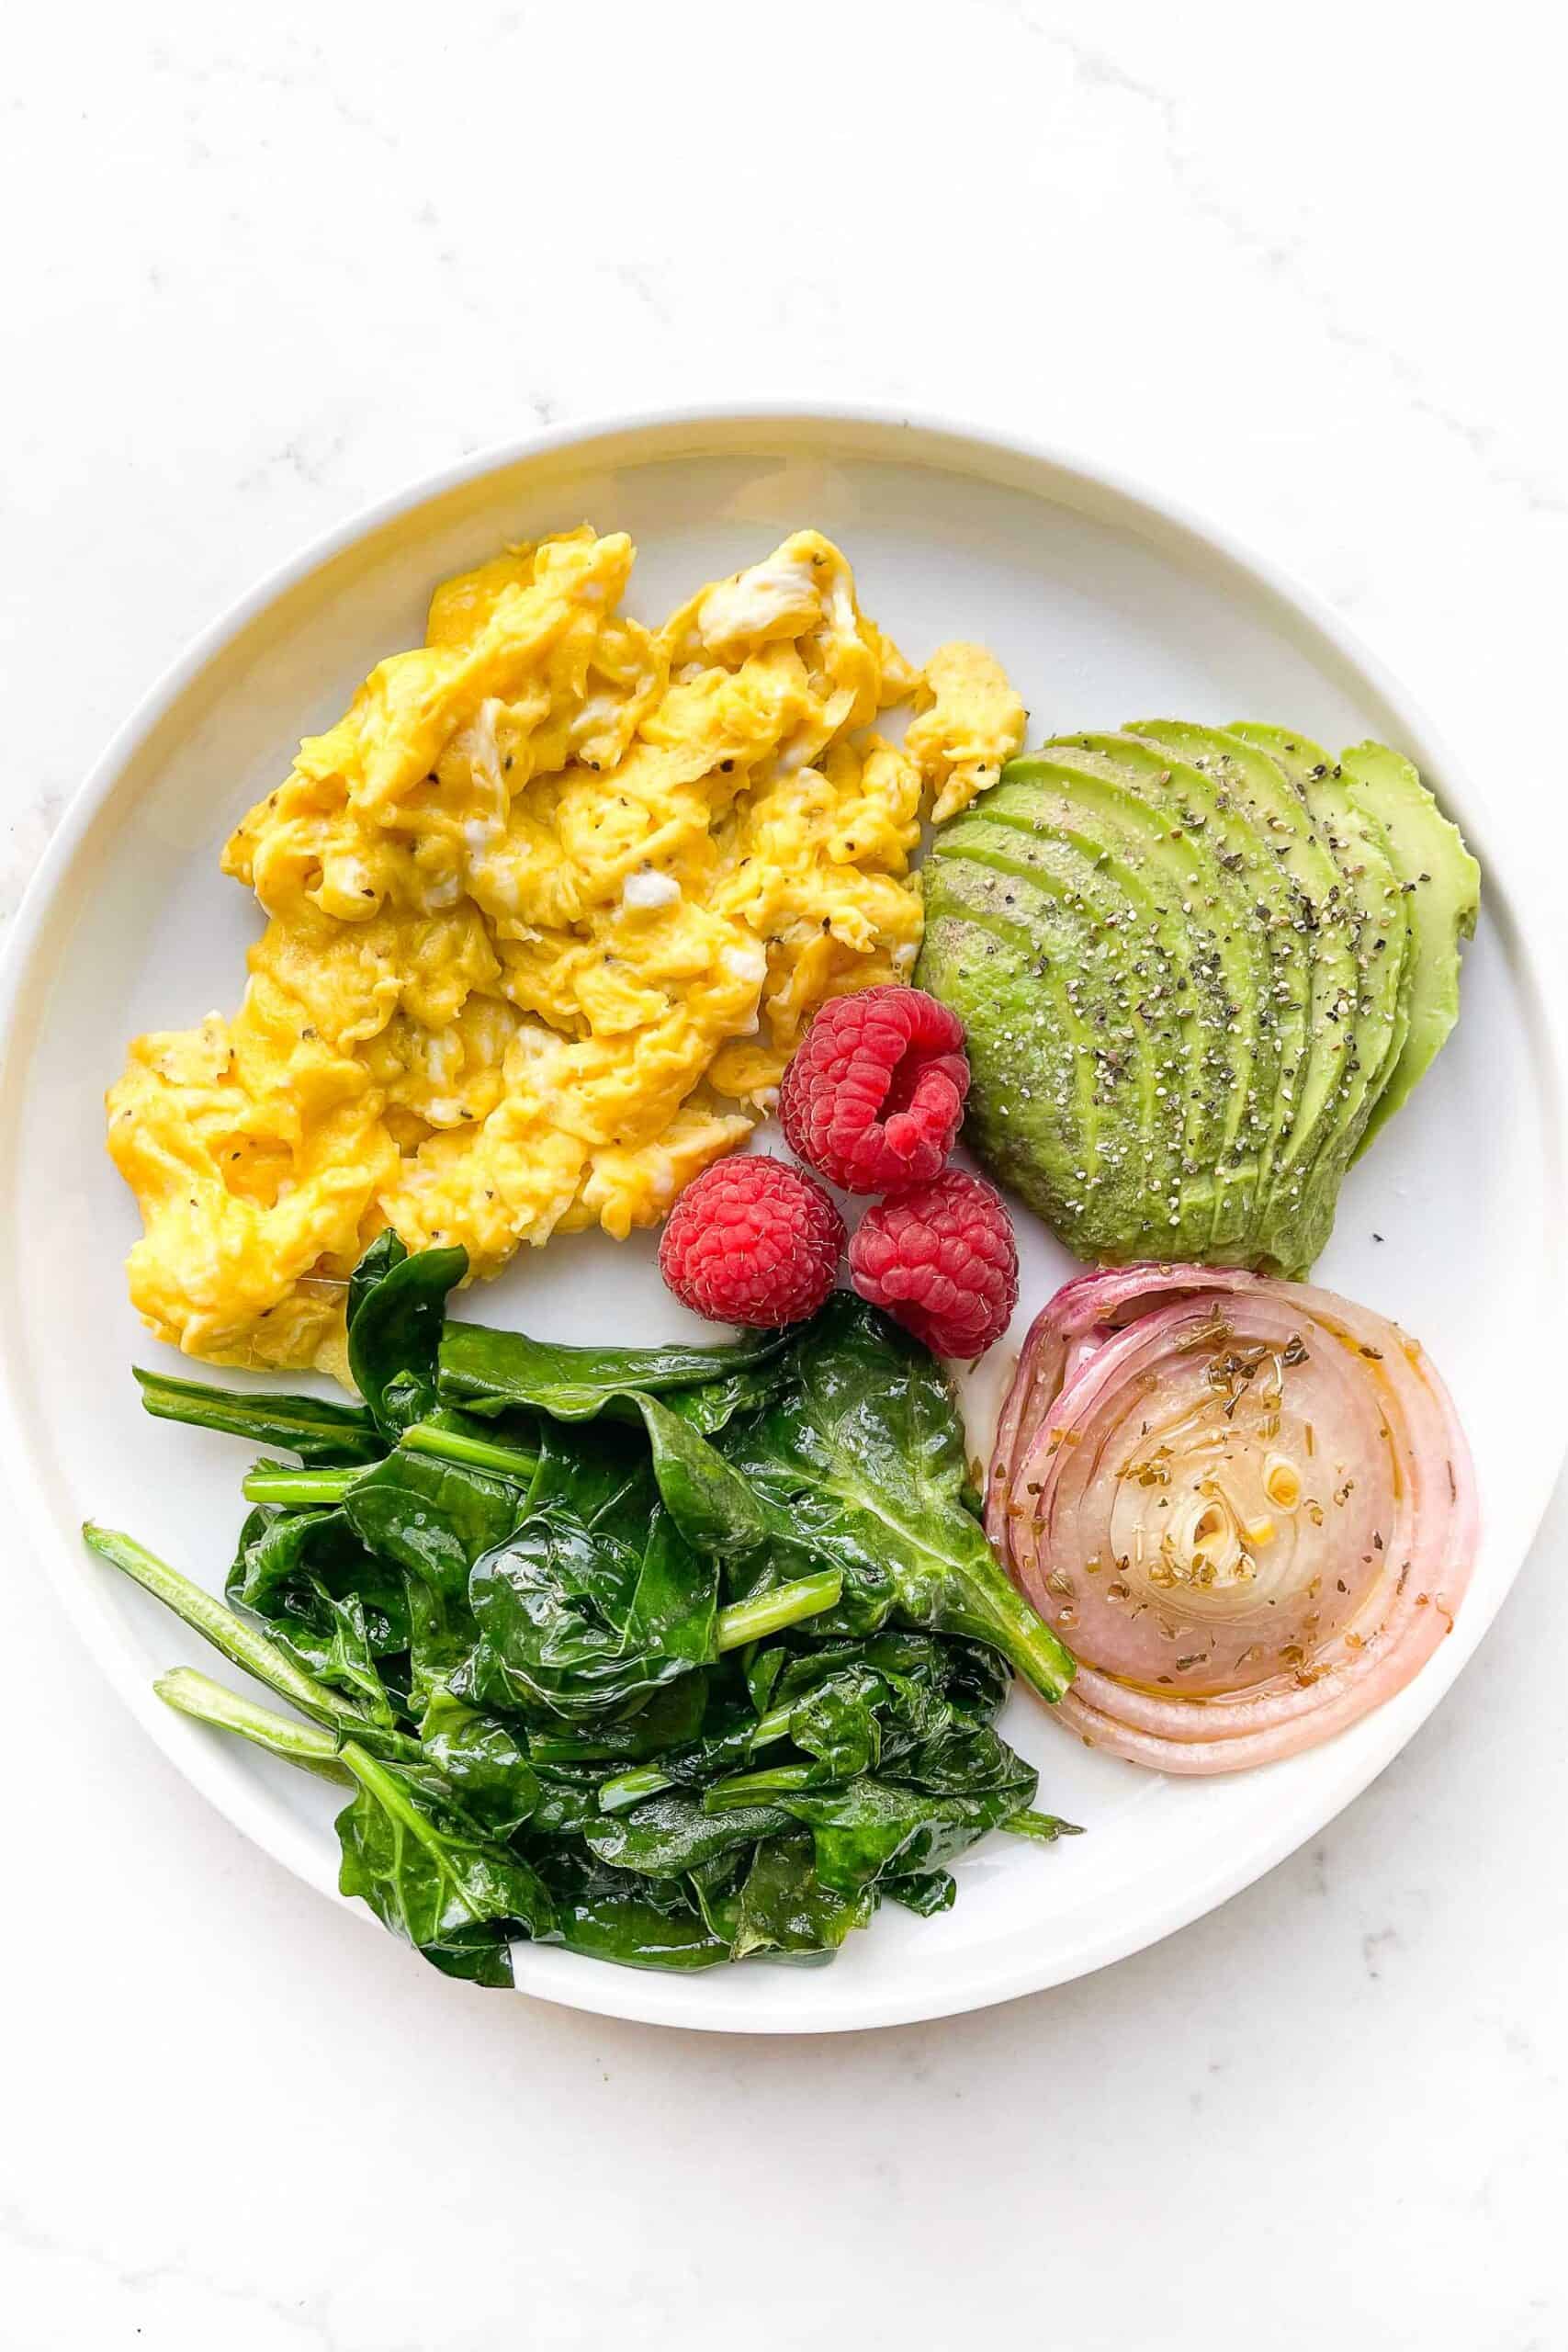 scrambled eggs, sauteed spinach, avocado, red onion and raspberries on a white plate and background